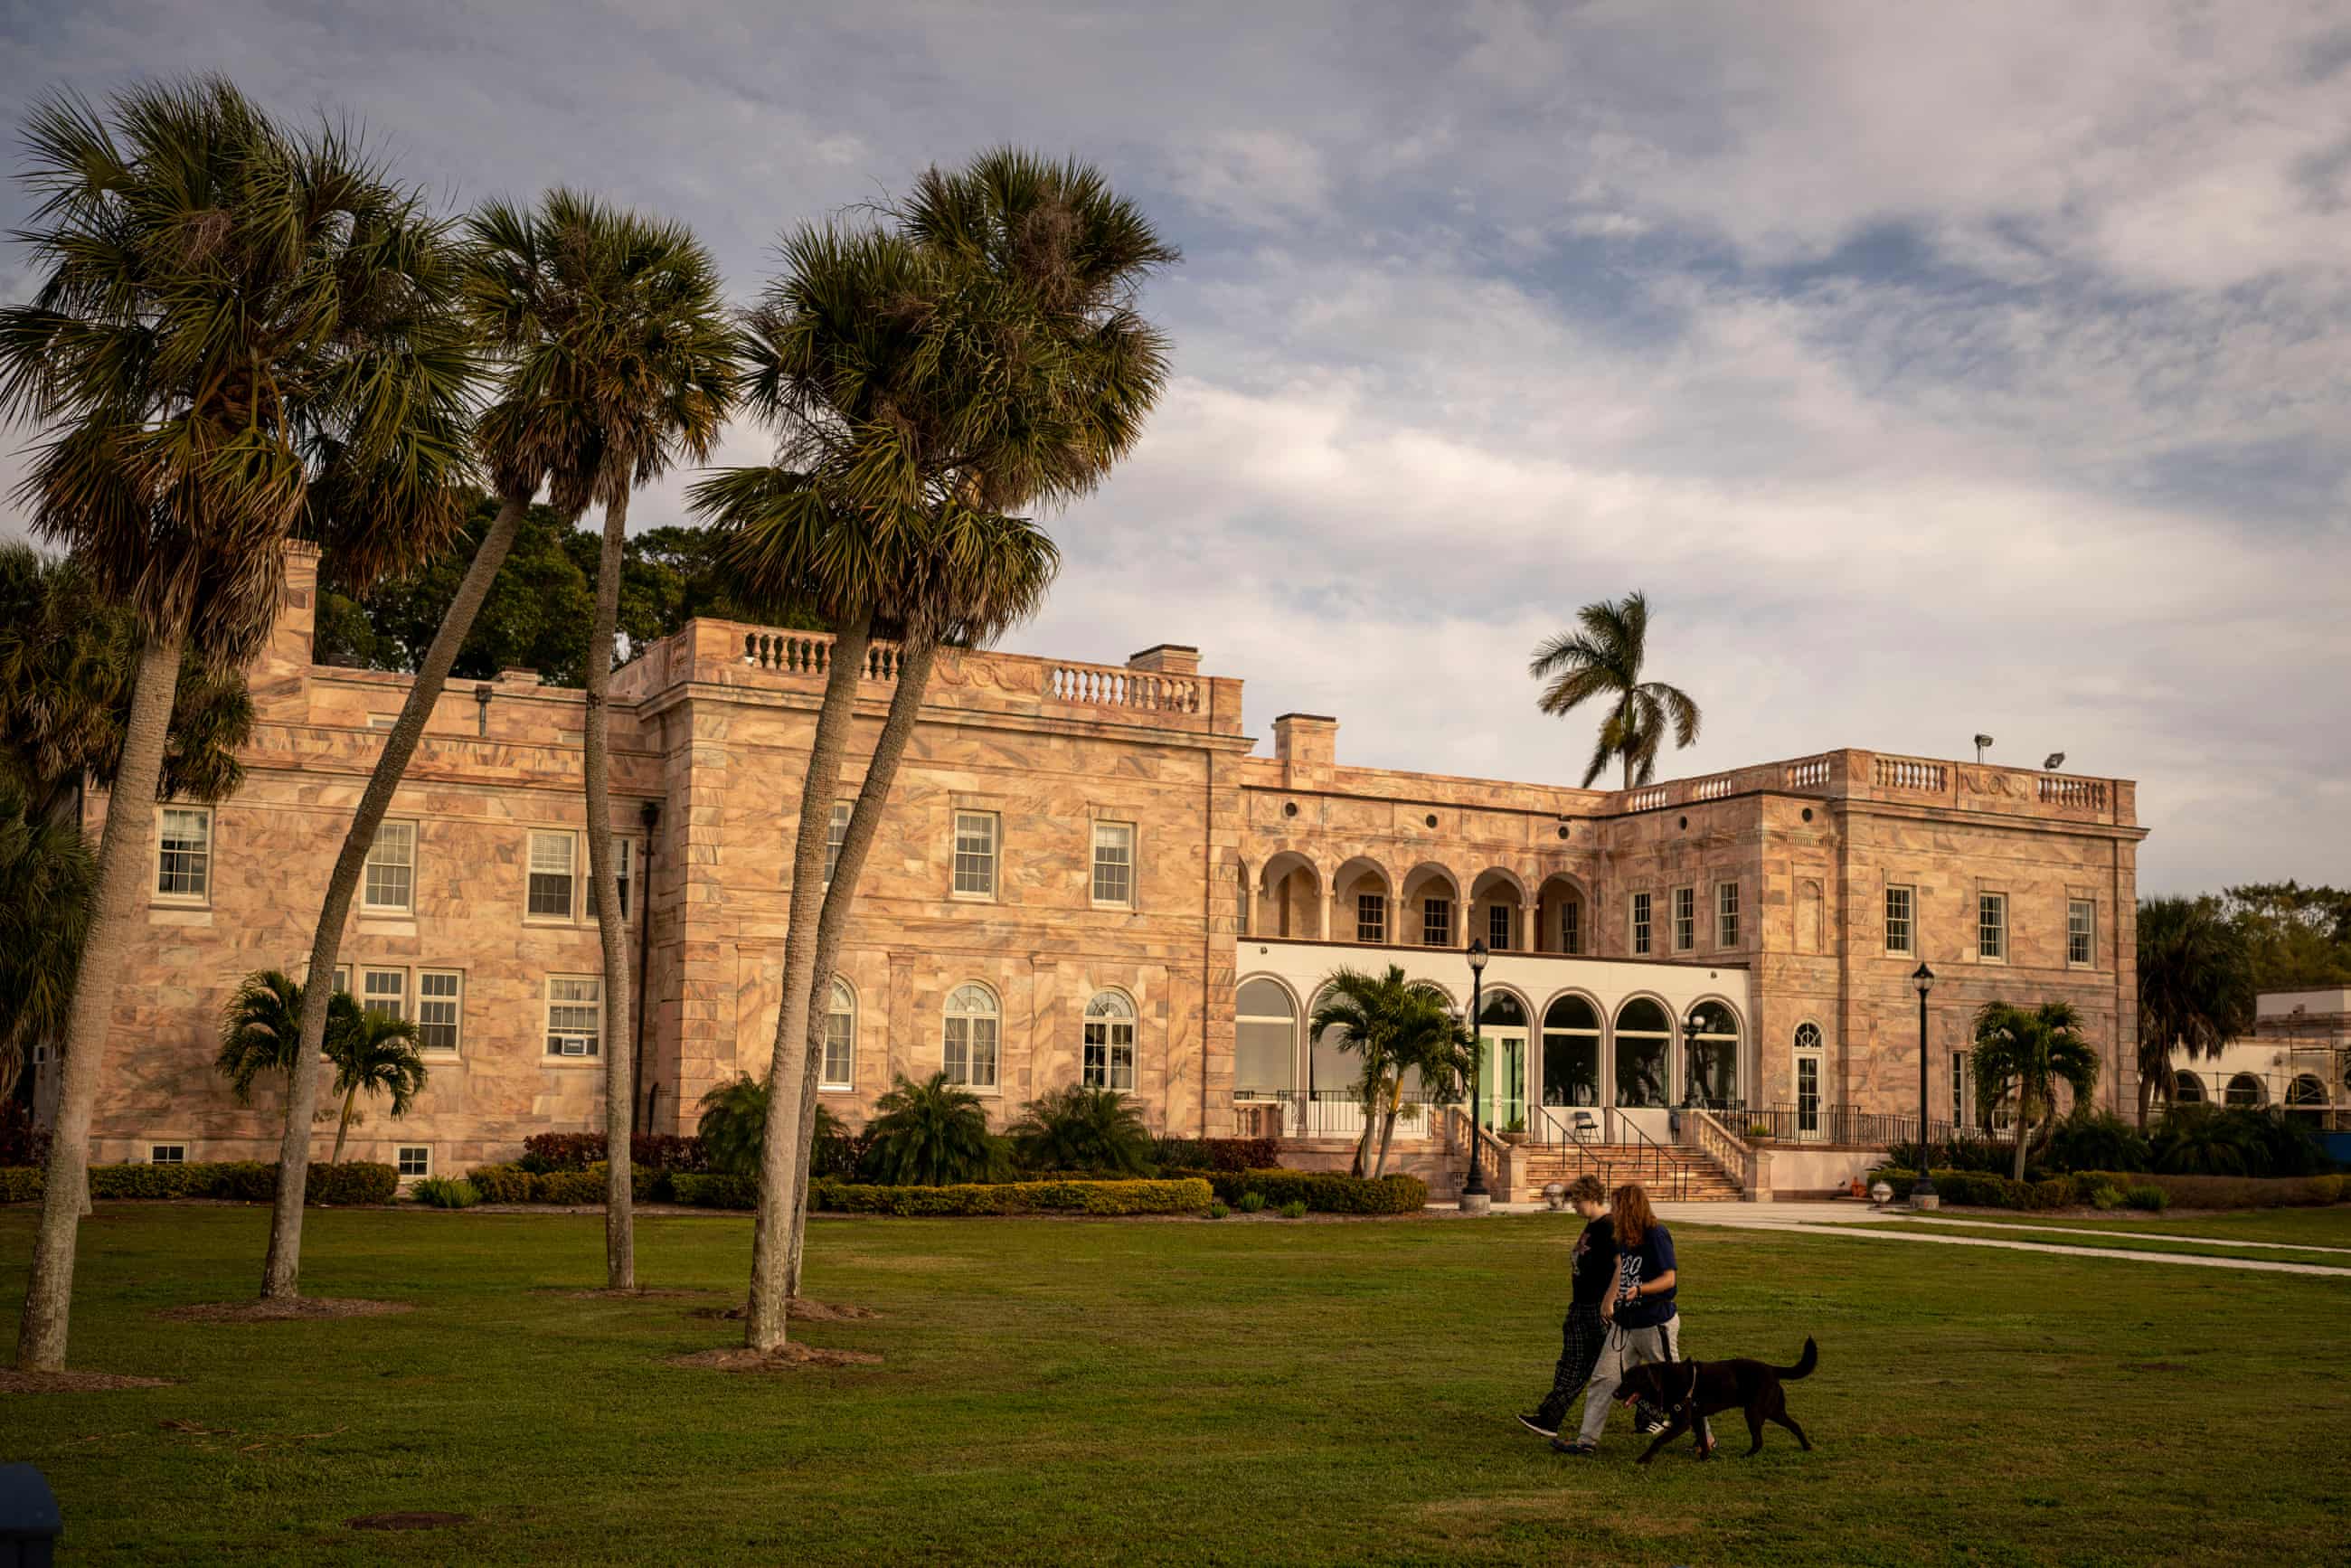 ‘Where learning goes to die’: DeSantis’s rightwing takeover of a liberal arts college (theguardian.com)